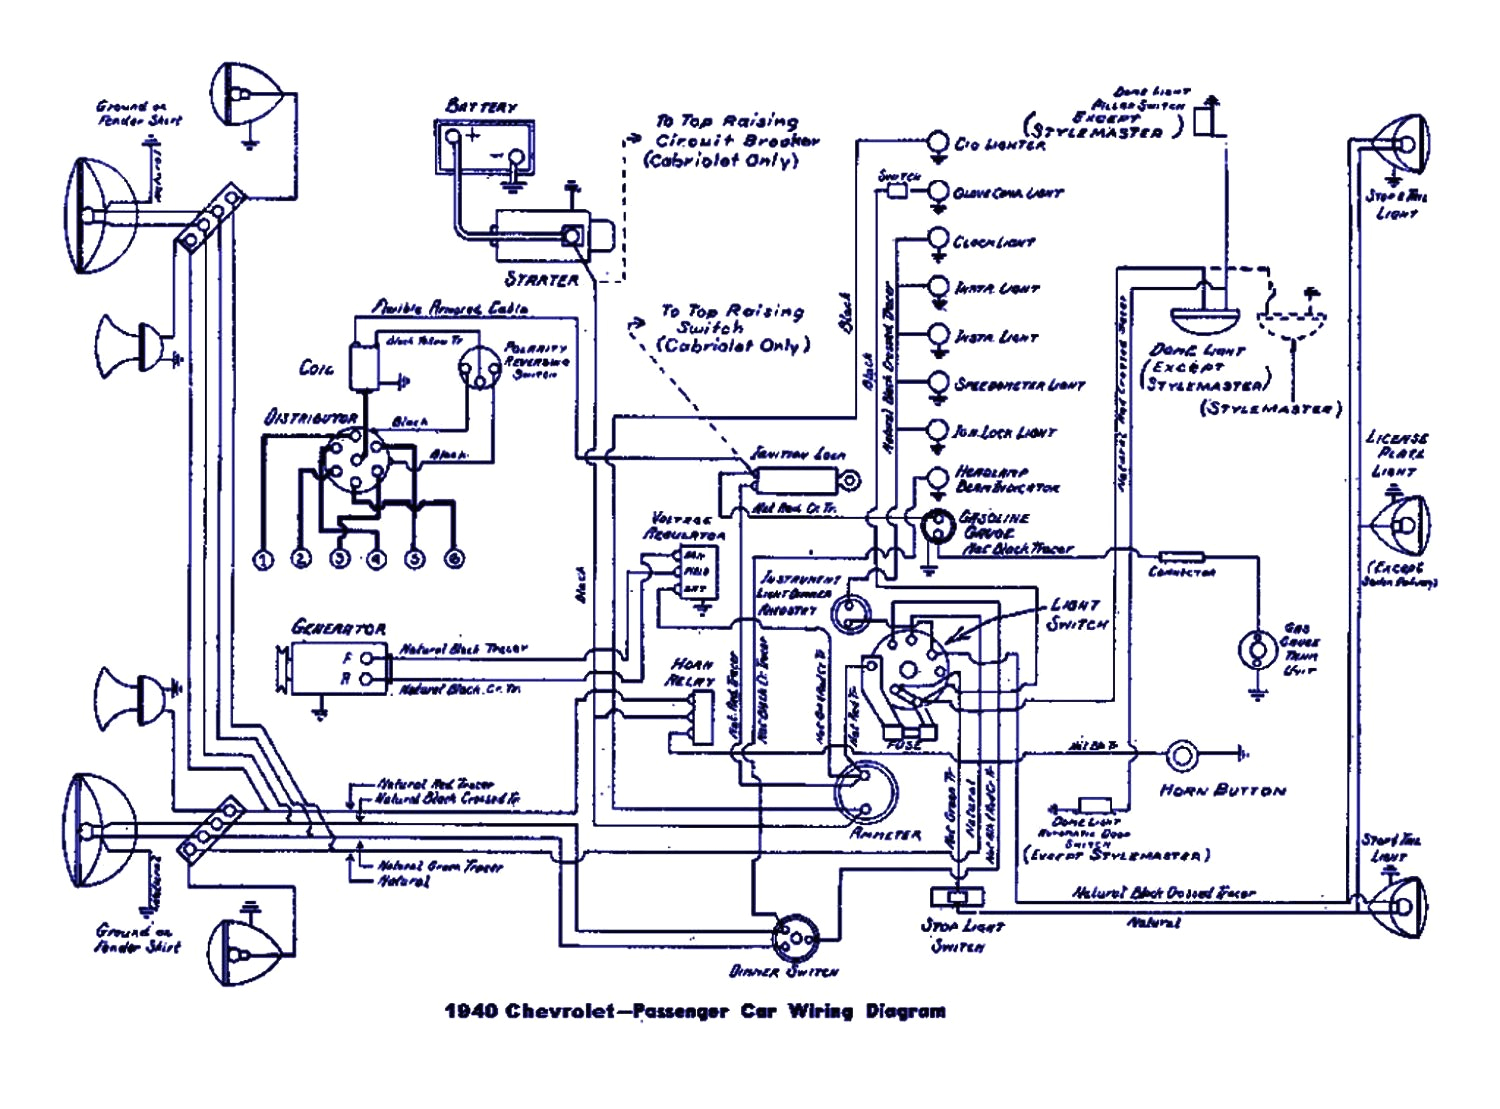 gem electric car e825 wiring diagram schematics diagrams o pics as well home electrical library of d jpg